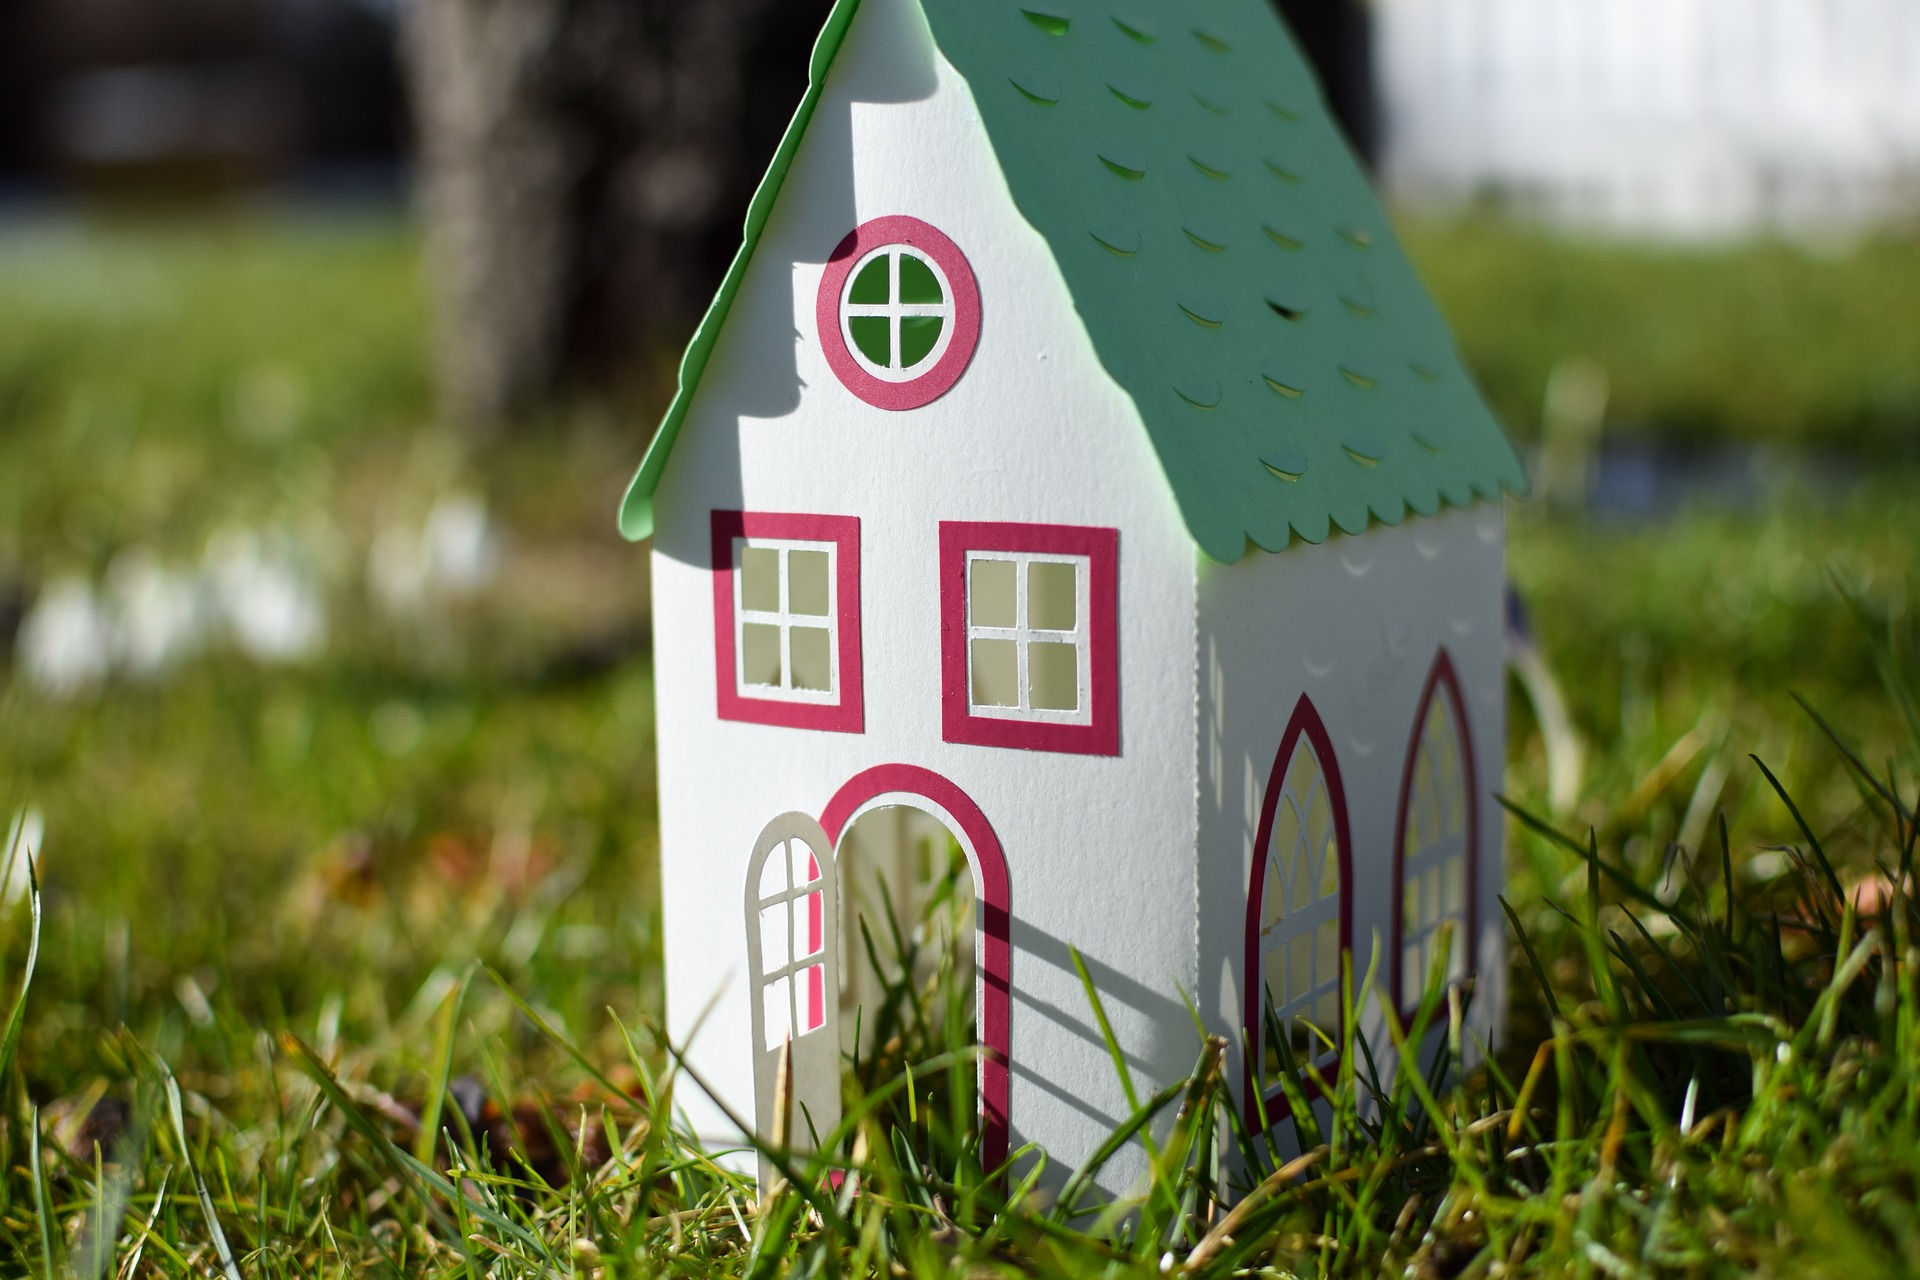 An image of a brightly coloured paper house